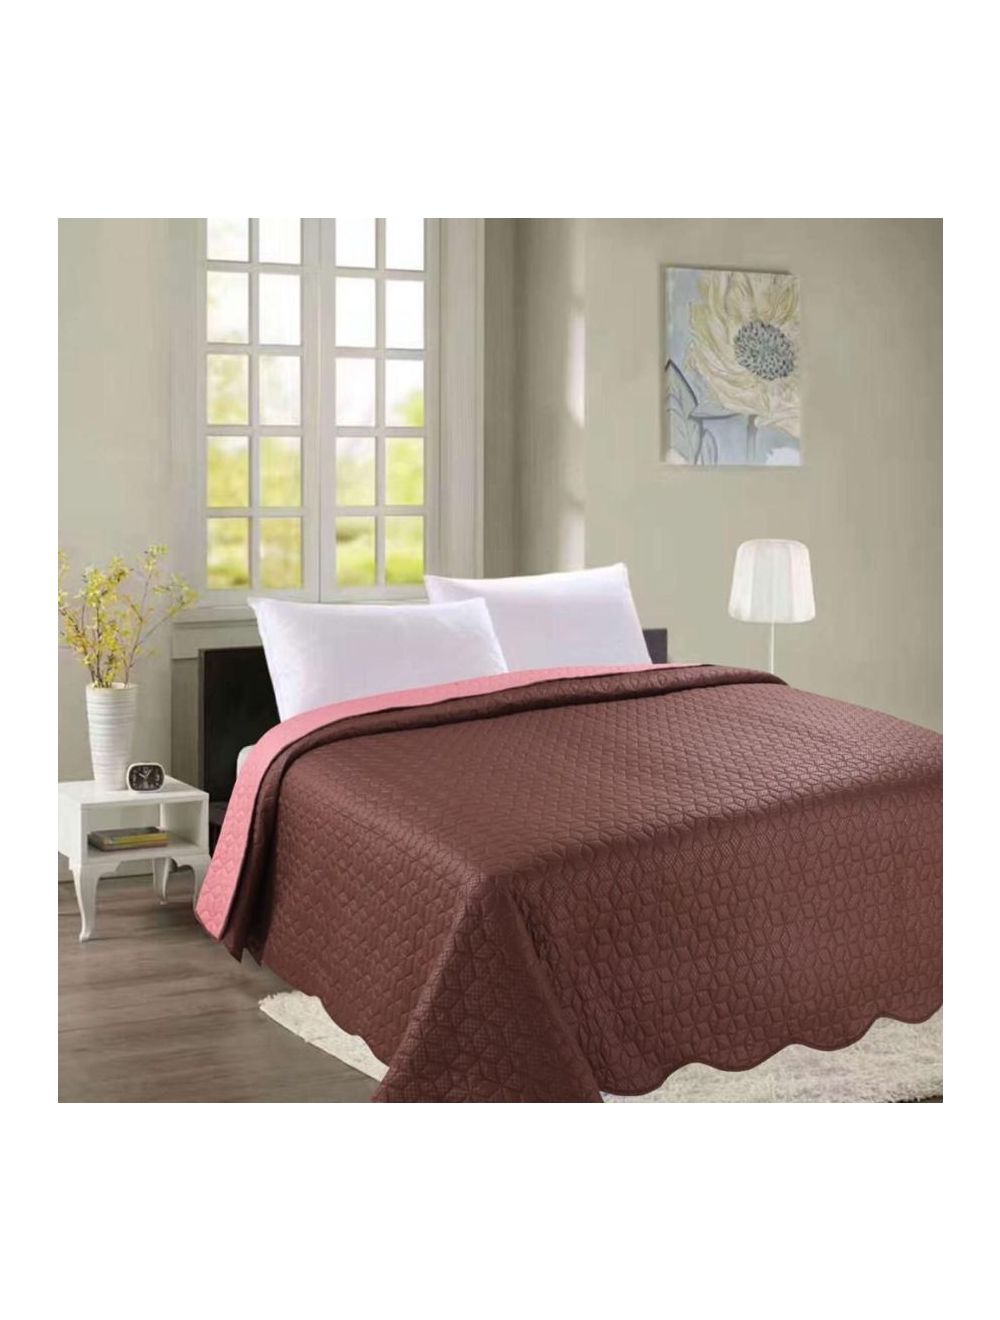 Rahalife 3 Piece Reversible Laser Quilted Bedspread/Quilt Set Polyester Coffee/Pink King-RLBS/K3/24